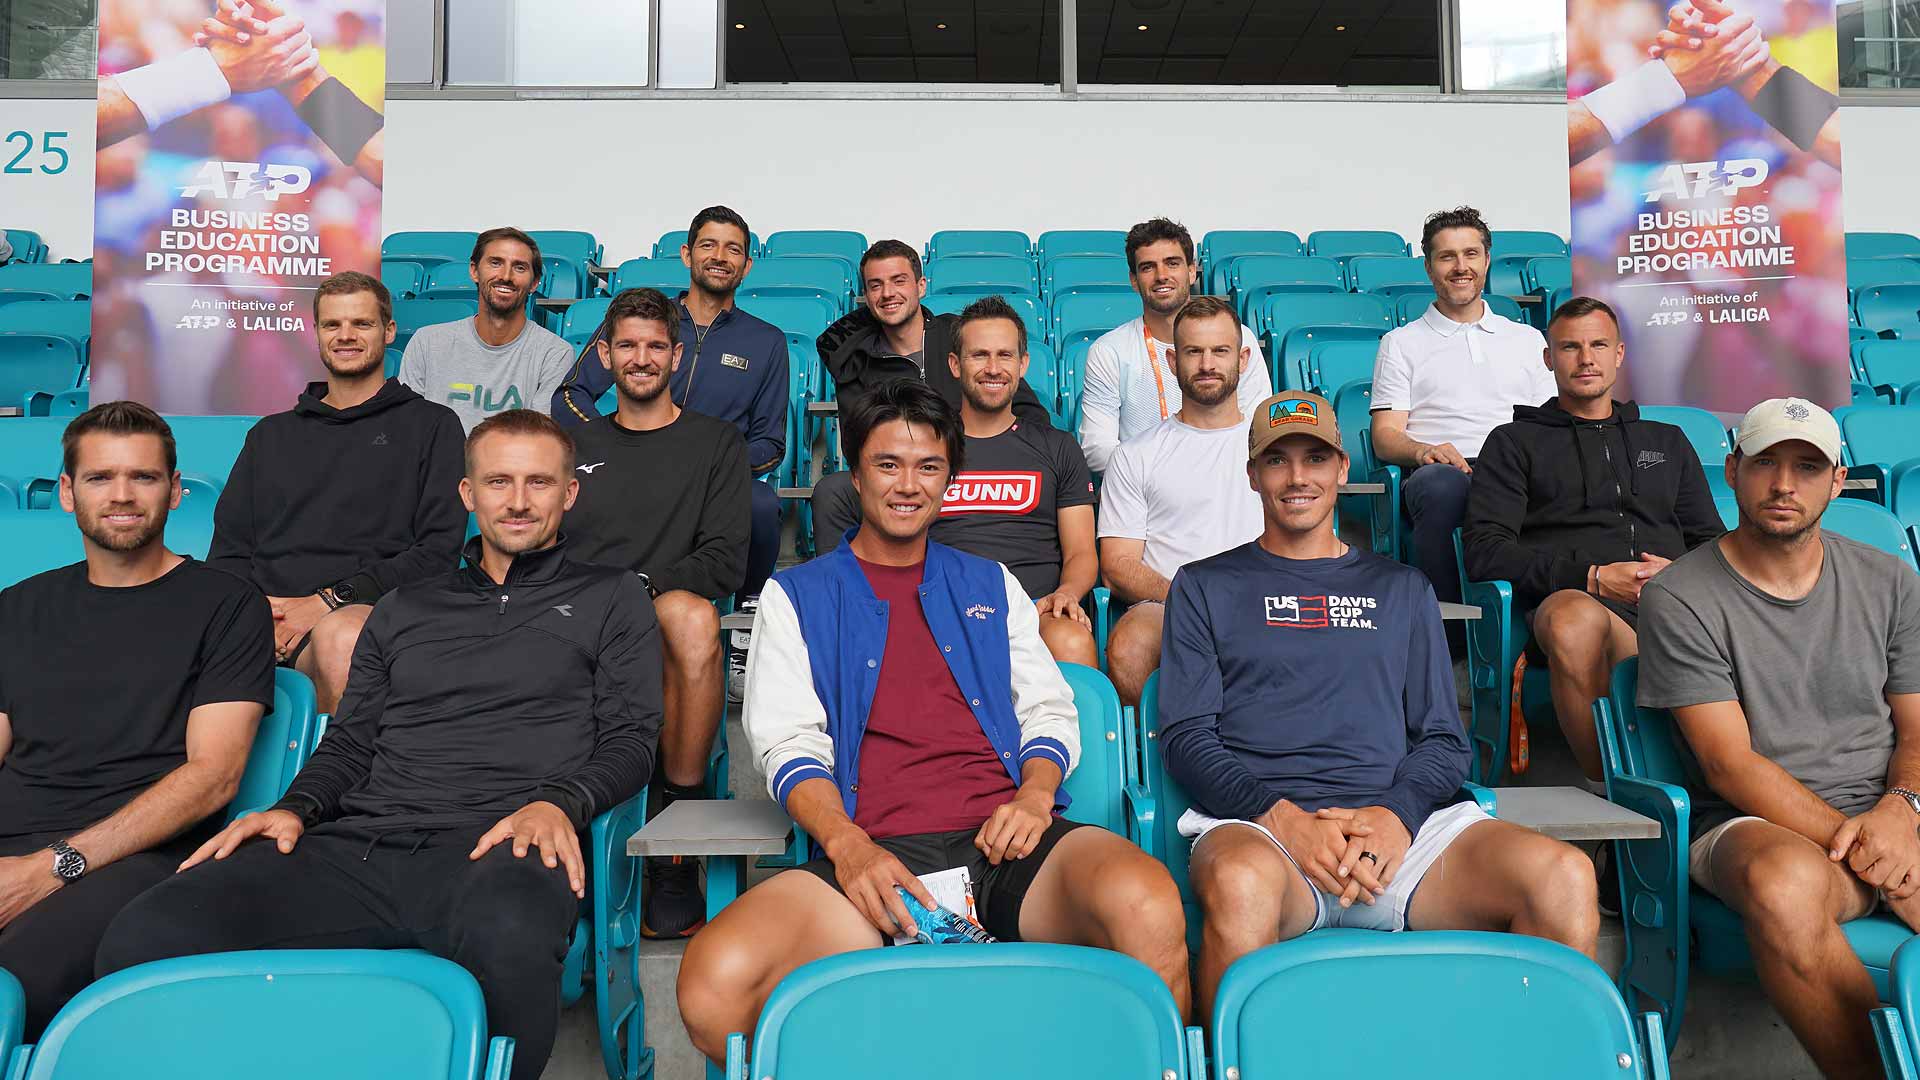 Players gather in Miami for the first in-person meeting of the 2024 ATP Business Education Programme.